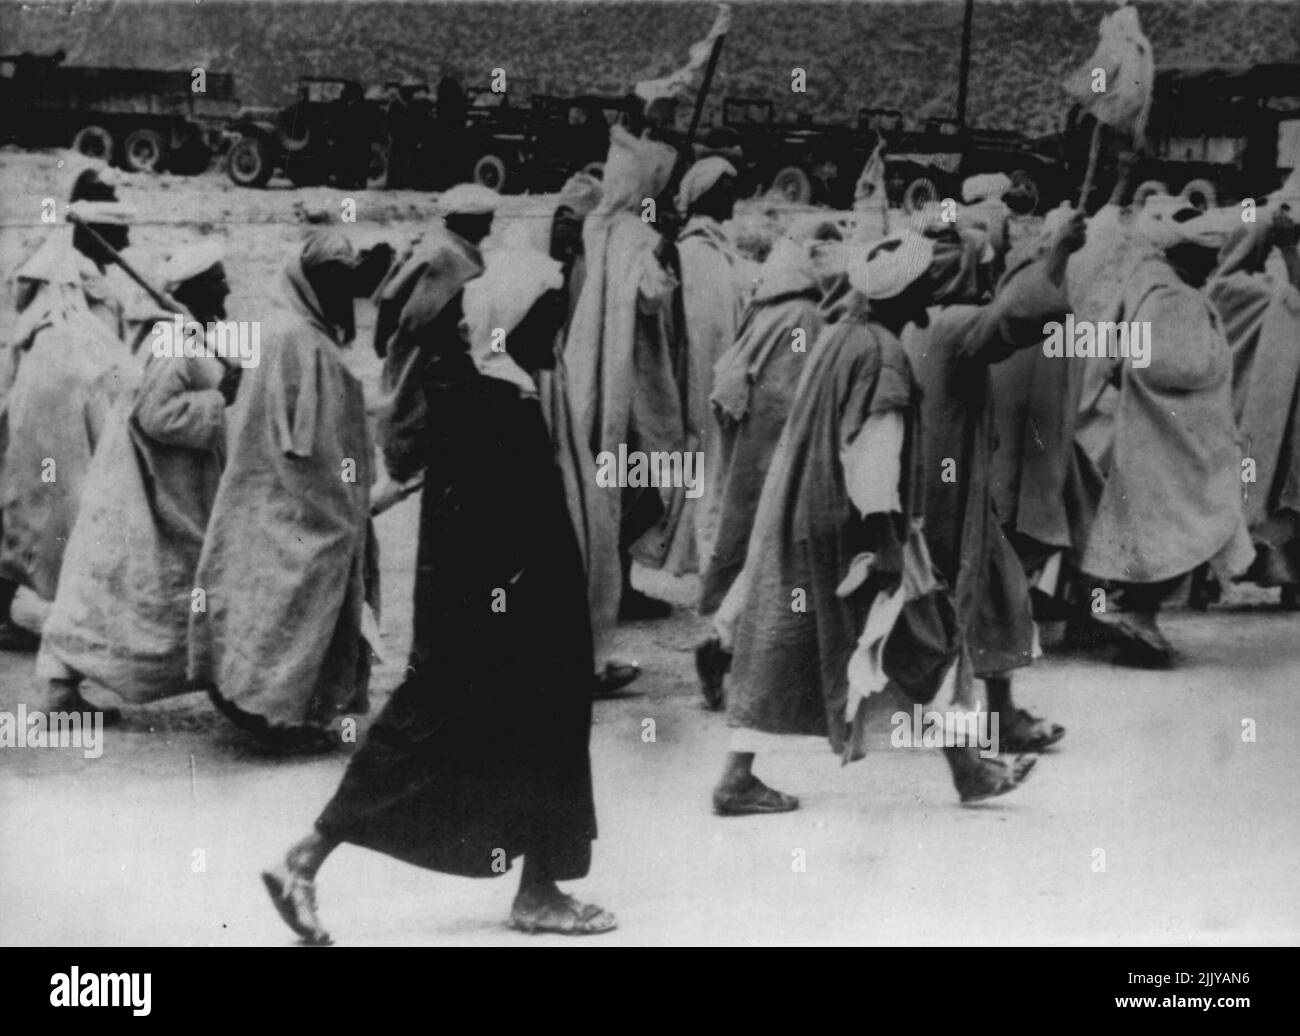 Repeat Performance -- Berbers with white flags as they march in to surrender to French Authorities, October 4, following the October 2 massacre of Europeans at the Moroccan mountain in town of Immouzer. Earlier massacres in Morocco have been followed by similar surrenders. At one such surrender earlier this year. The tribesmen ceremonially slaughtered cattle as a sacrifice. October 6, 1955. (Photo by Associated Press Photo). Stock Photo